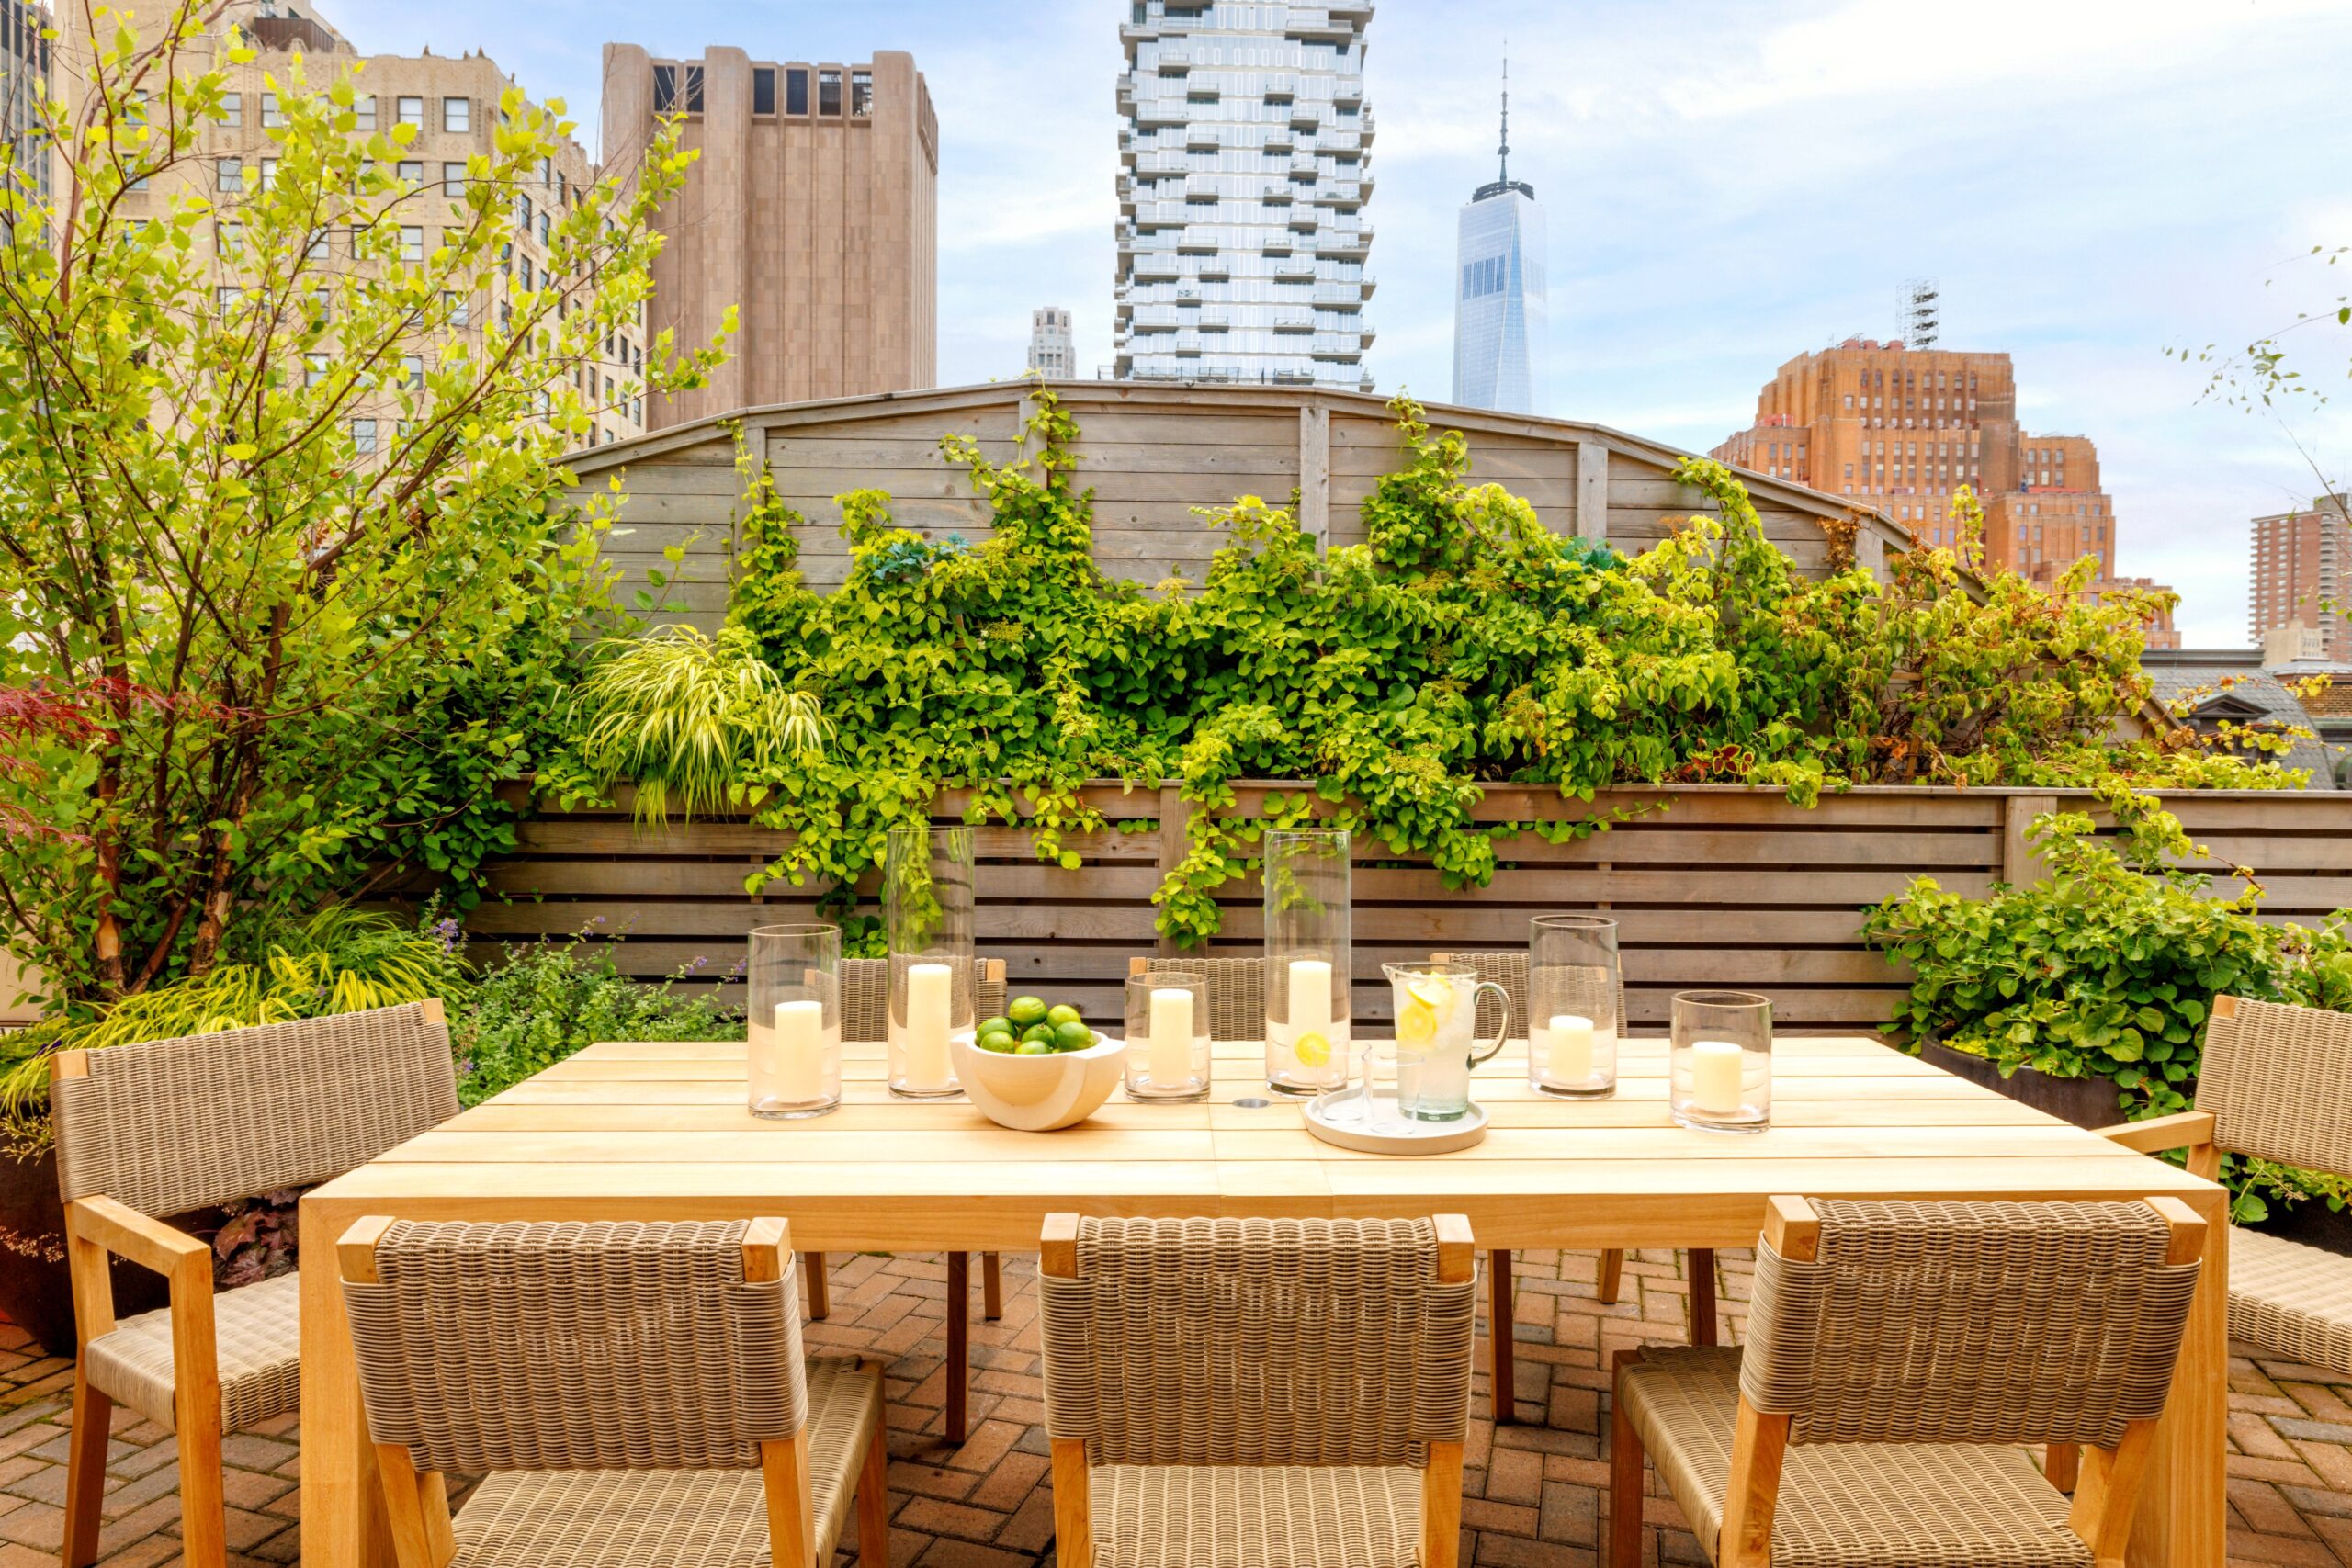 Outdoor Dining Table and Chairs at The Roxy Penthouse Terrace with view of One World Trade Center.